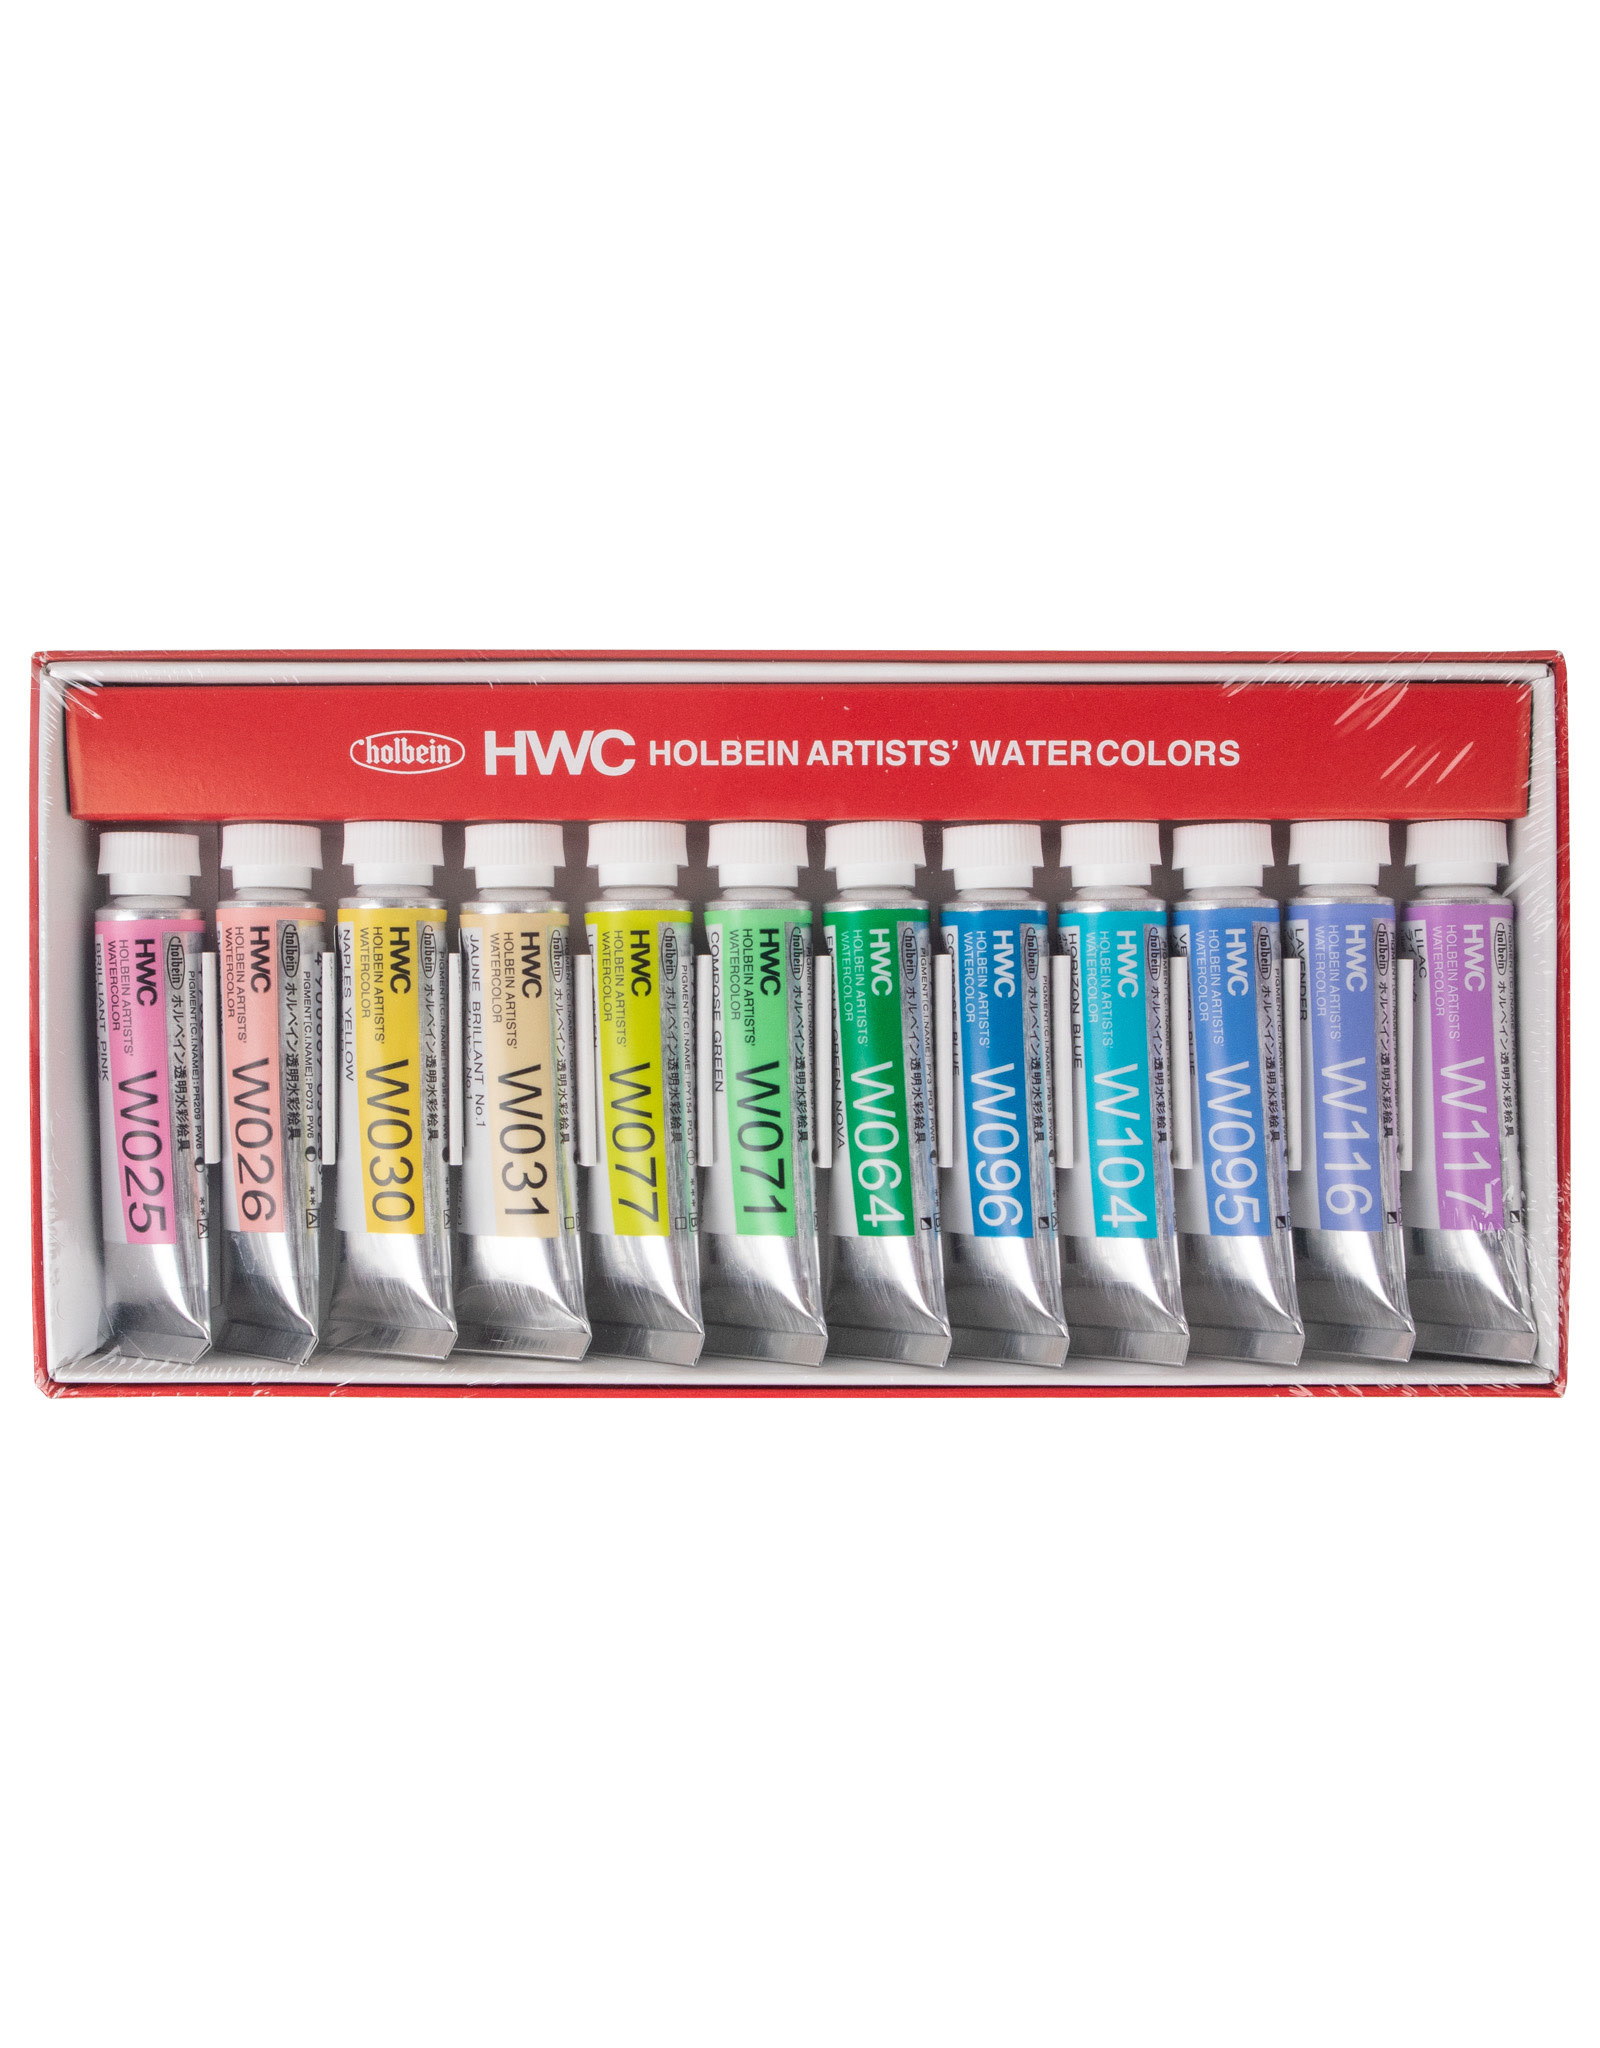 Holbein Watercolor Paint Set - Summer Neon Colors - Set of 6 Vibrant,  Happy, Cheerful Summer Colors!